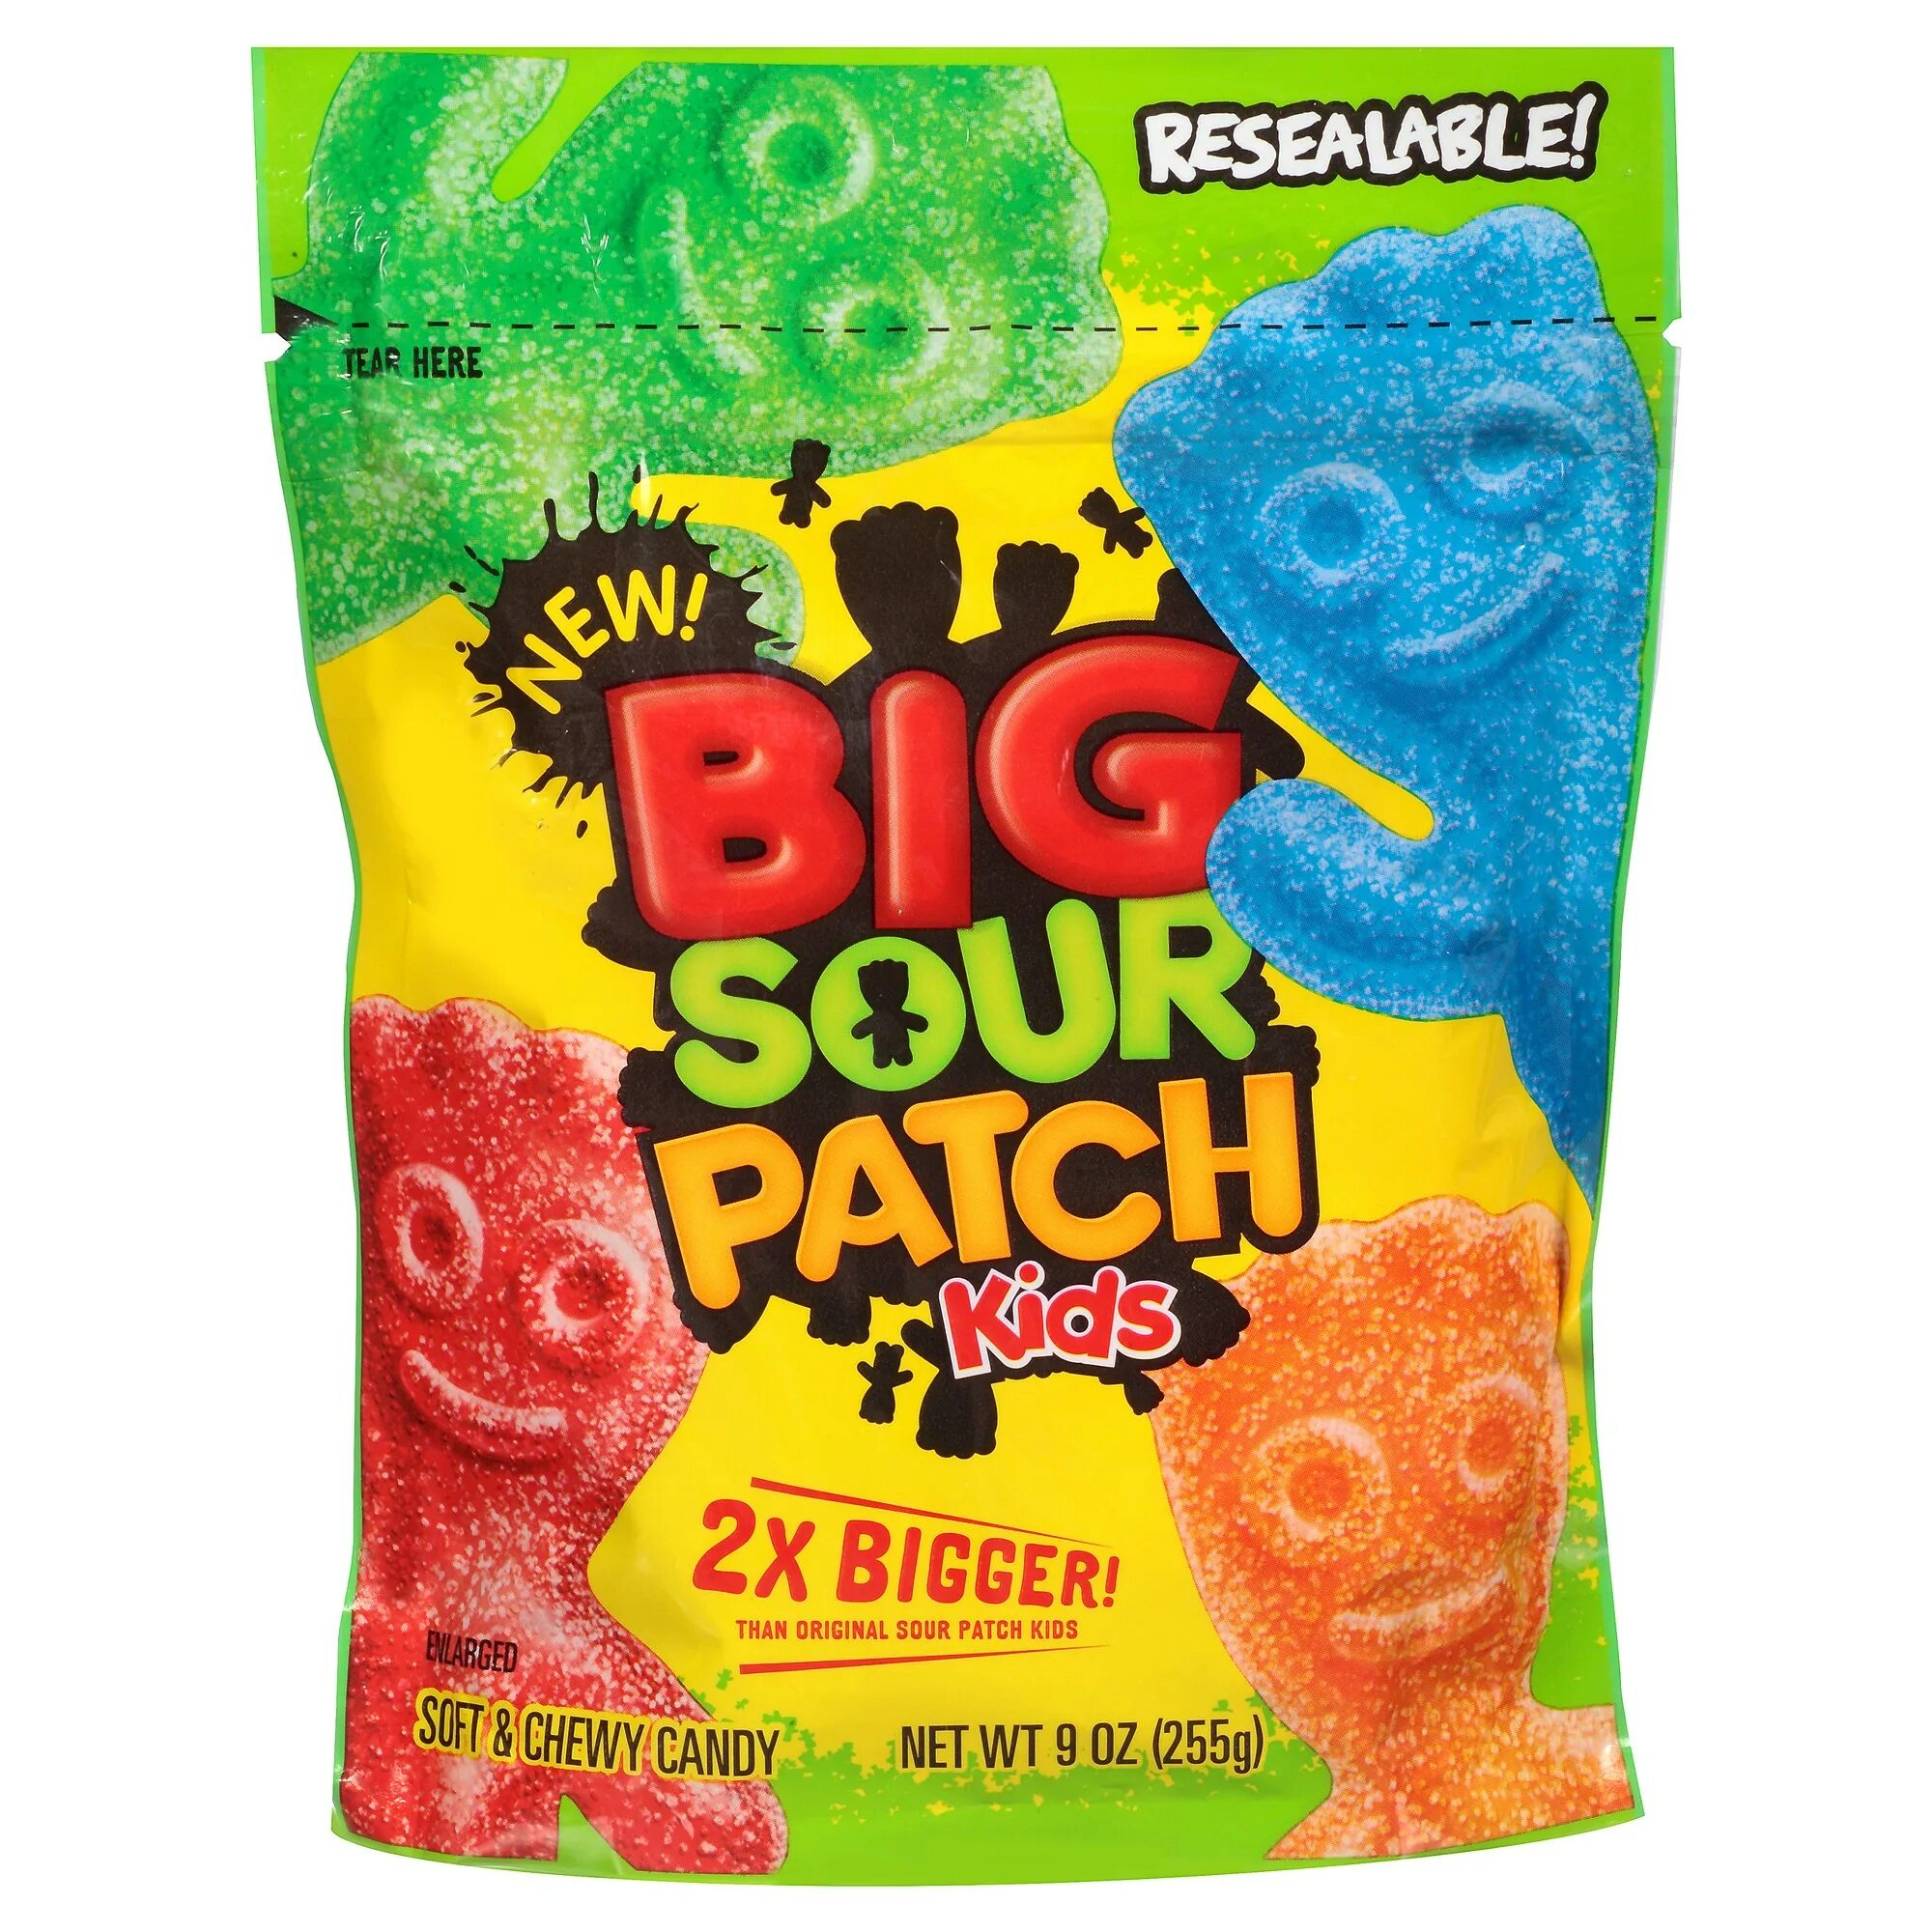 Sour patch kids. Sour Patch Soft and Chewy Candy Kids. Кислые конфеты Sour Candy японские. Sour Patch Kids Candy.